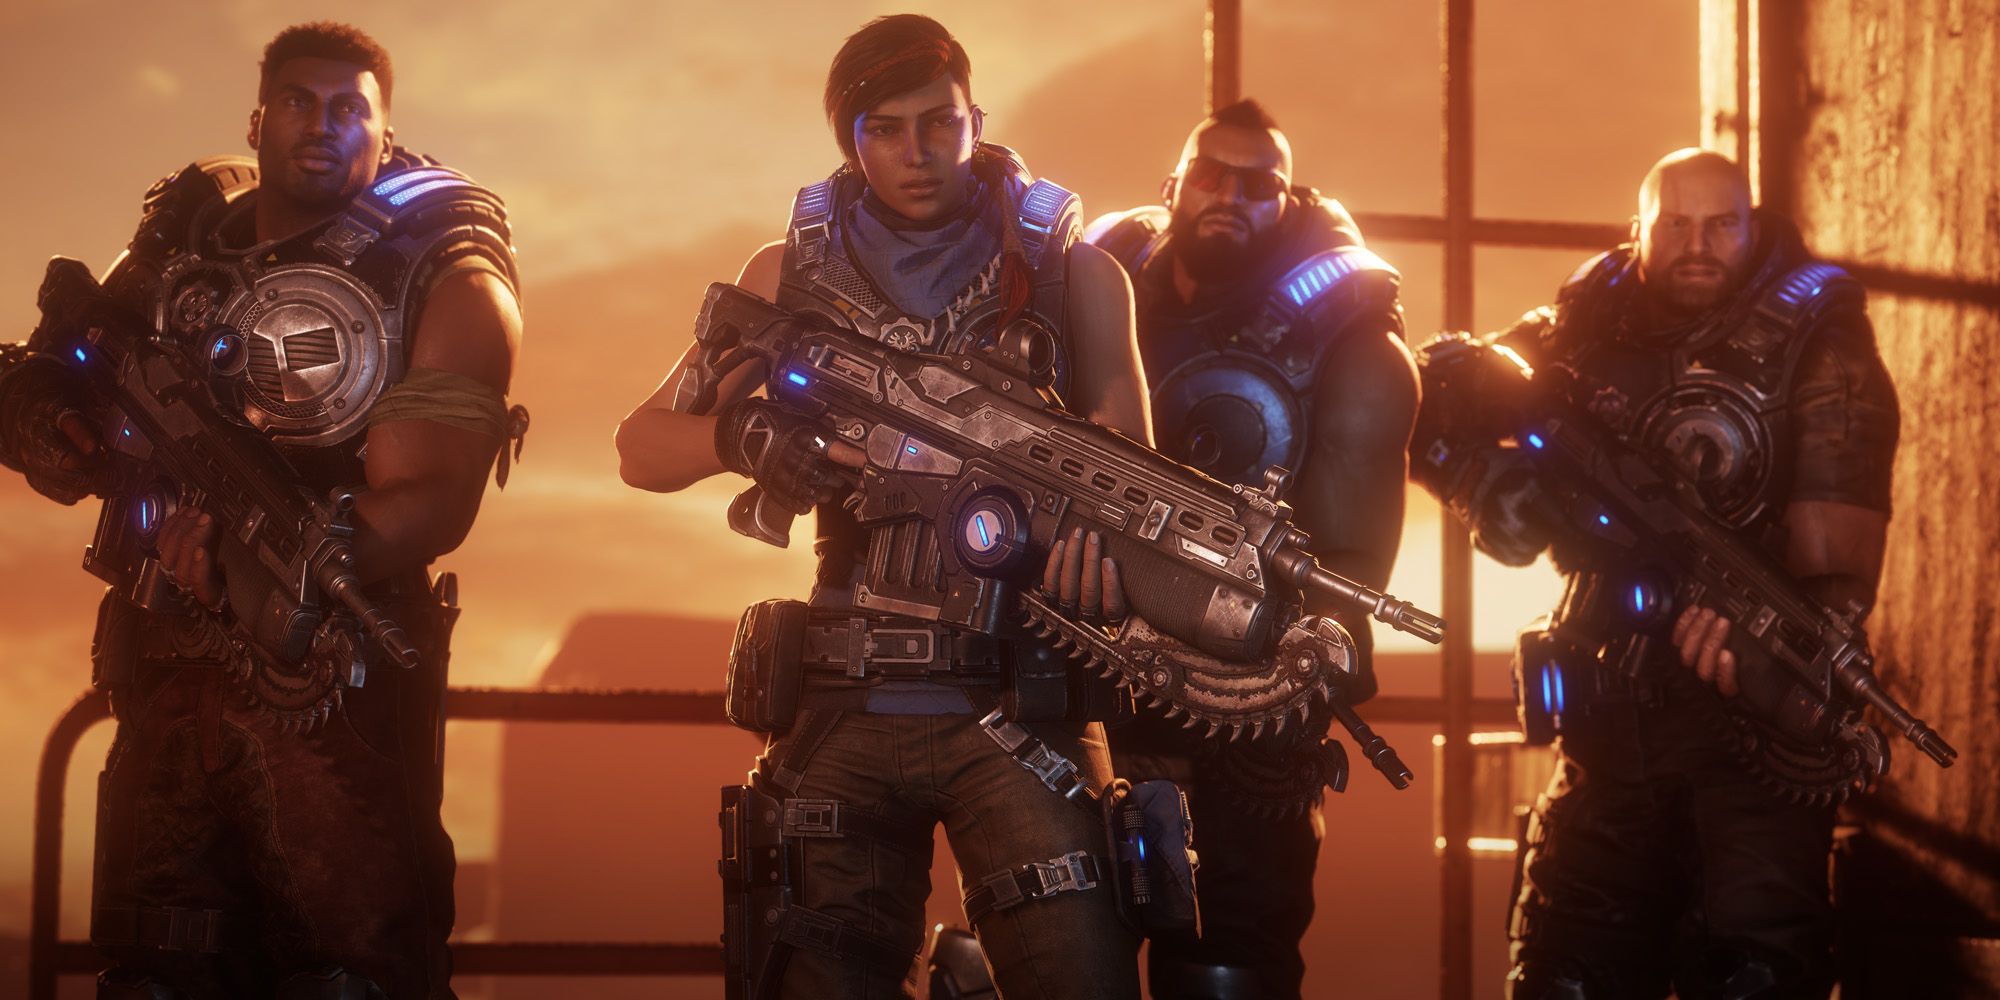 Some soldiers in Gears 5